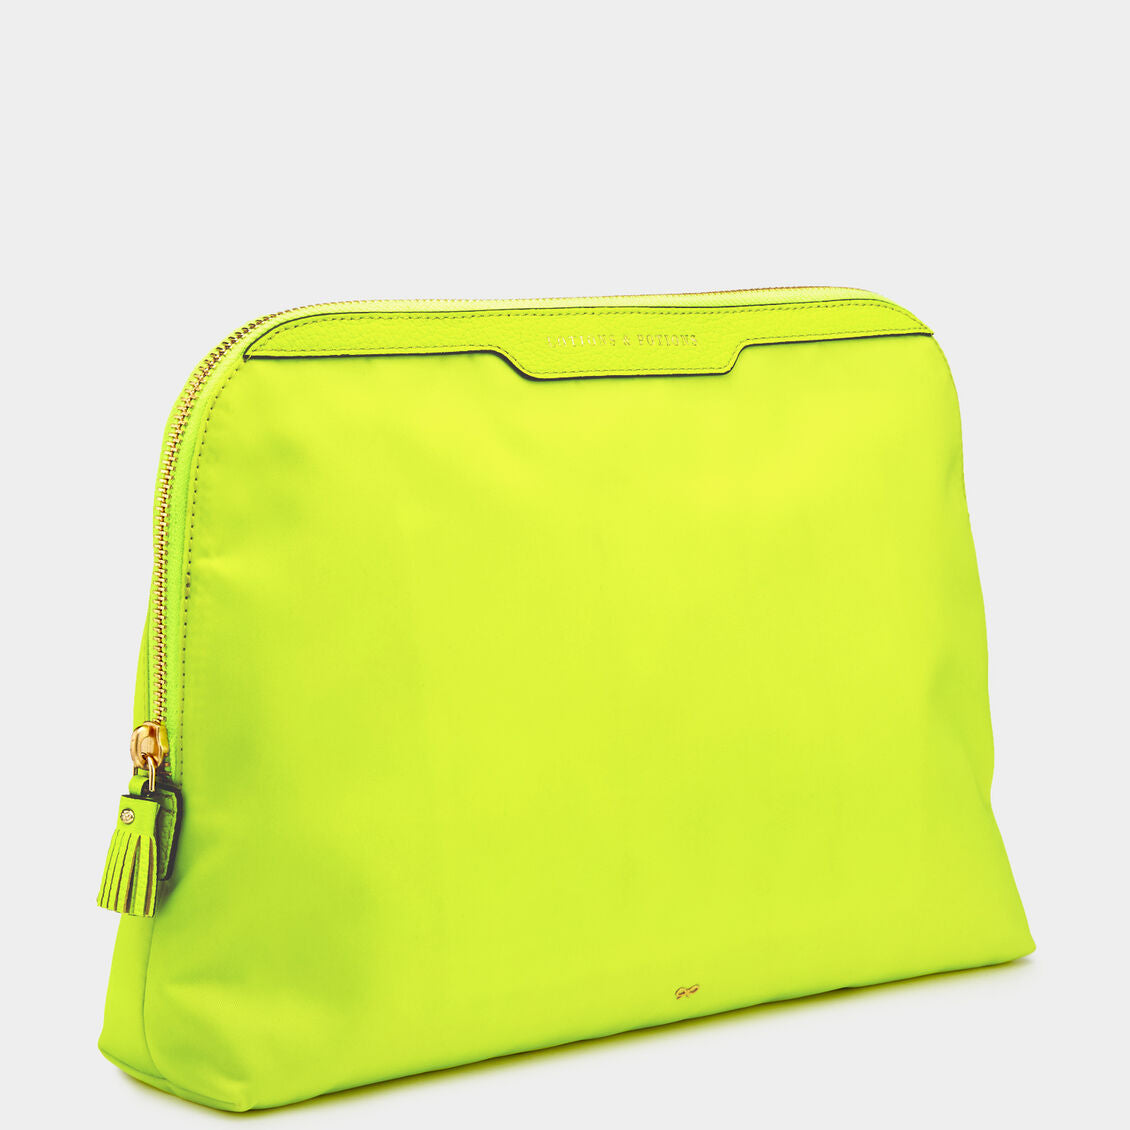 「Lotions and Potions」ポーチ -

                  
                    Nylon in Neon Yellow (Tumbled Calf) -
                  

                  Anya Hindmarch JP
